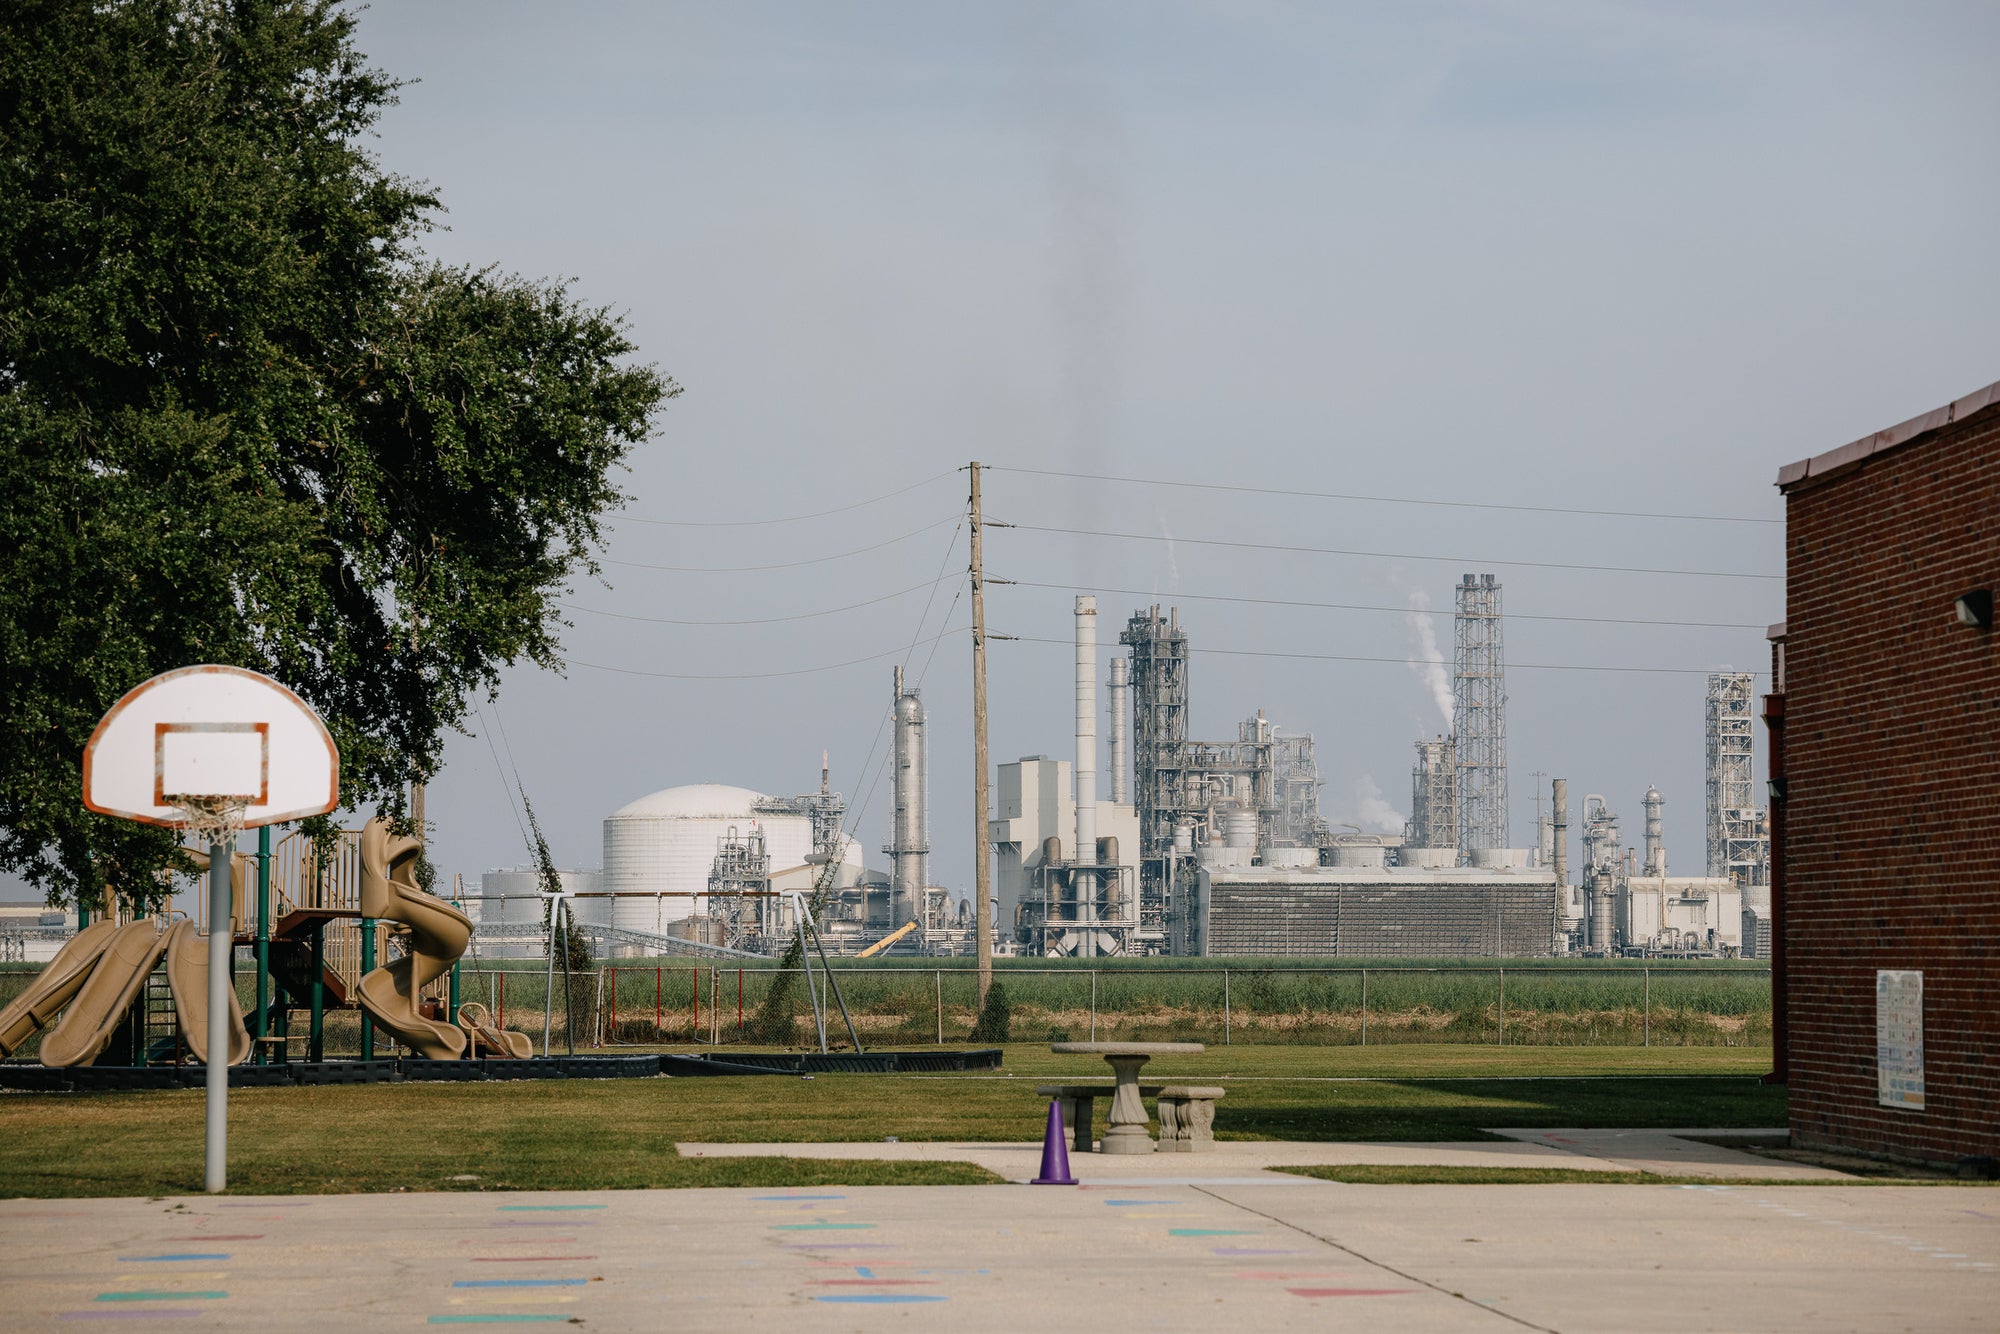 Donaldsonville Primary School is located next to the CF Industries ammonia plant in Donaldsonville, Louisiana. CF Industries is planning a $200 million carbon capture operation at the facility.  (Bryan Tarnowski for Earthjustice) 